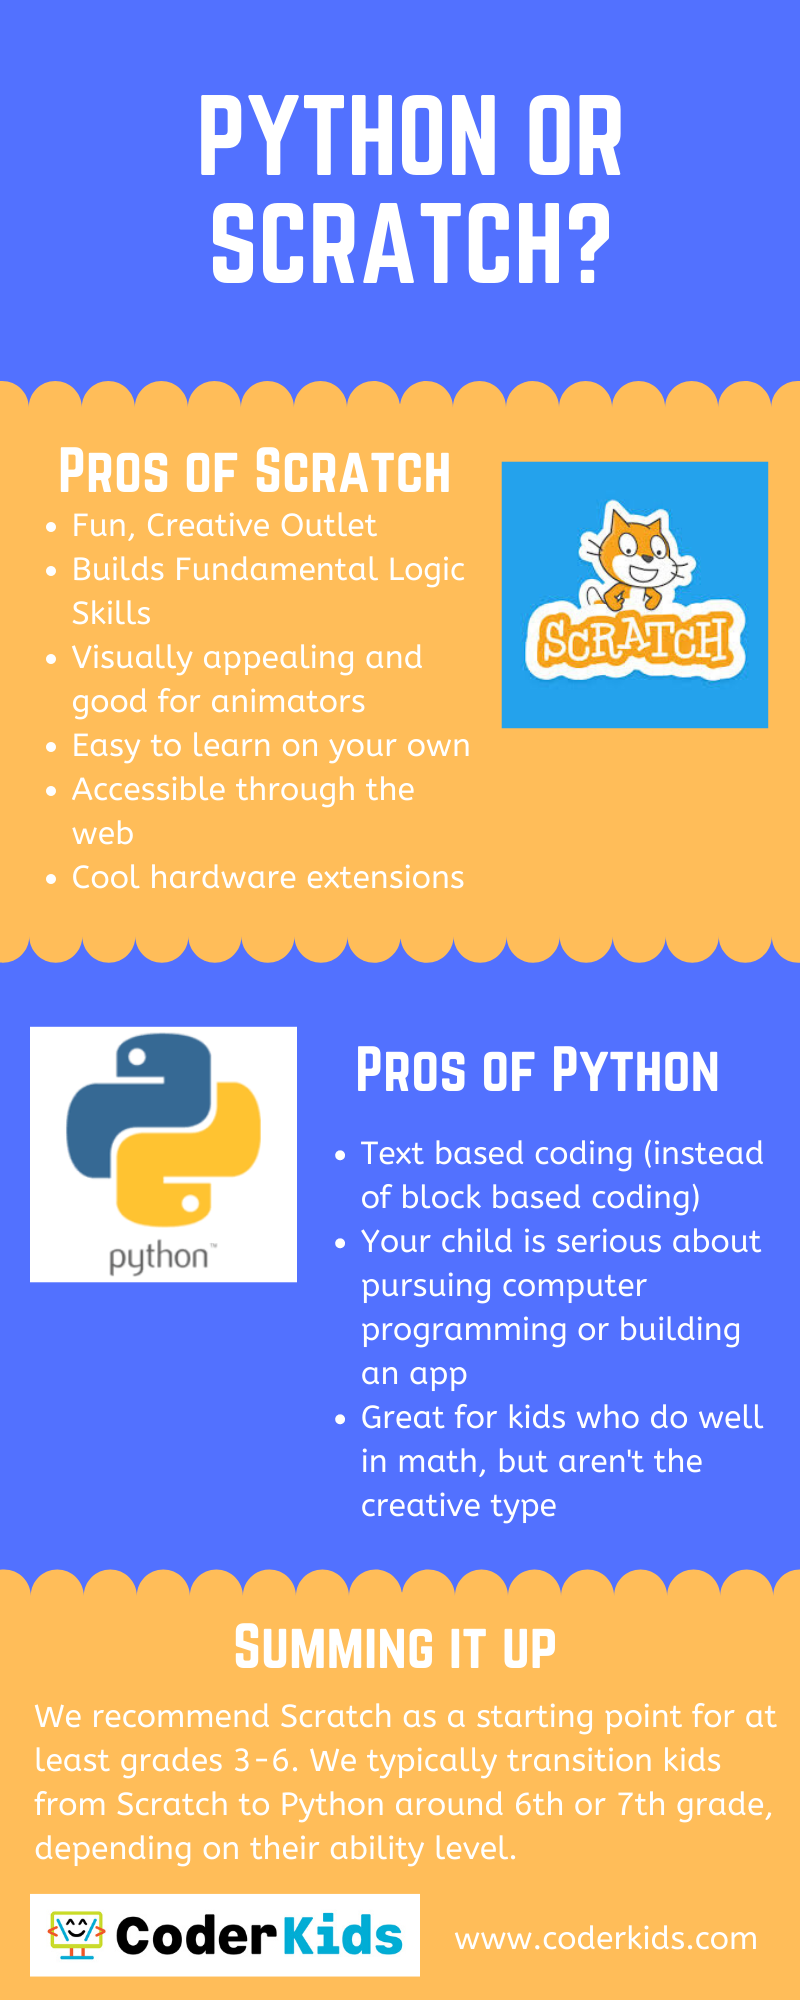 Should I learn Scratch before Python?